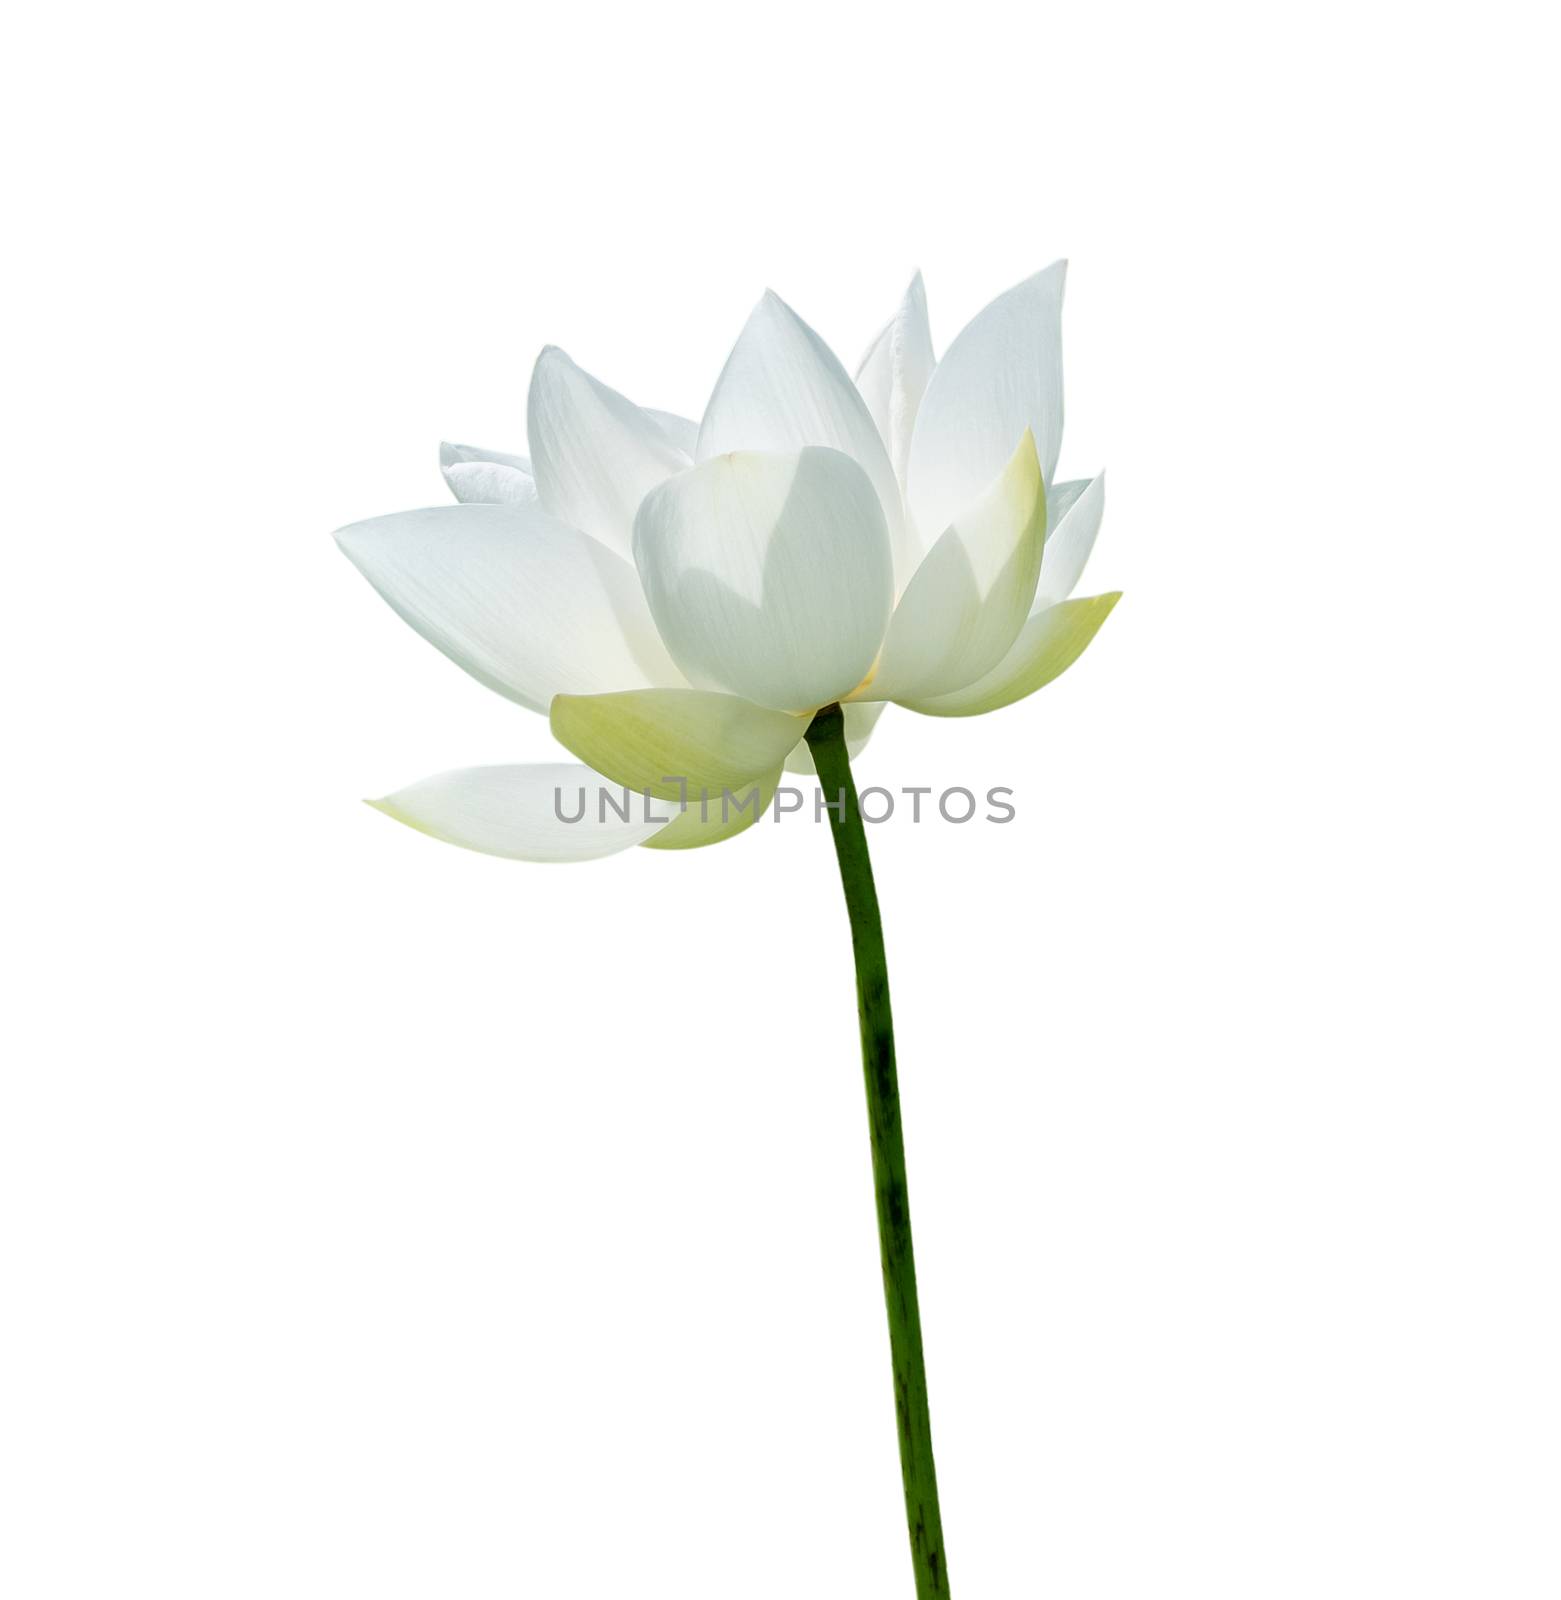 White Lotus flower isolated on white background. Nature concept For advertising design and assembly. File contains with clipping path so easy to work.